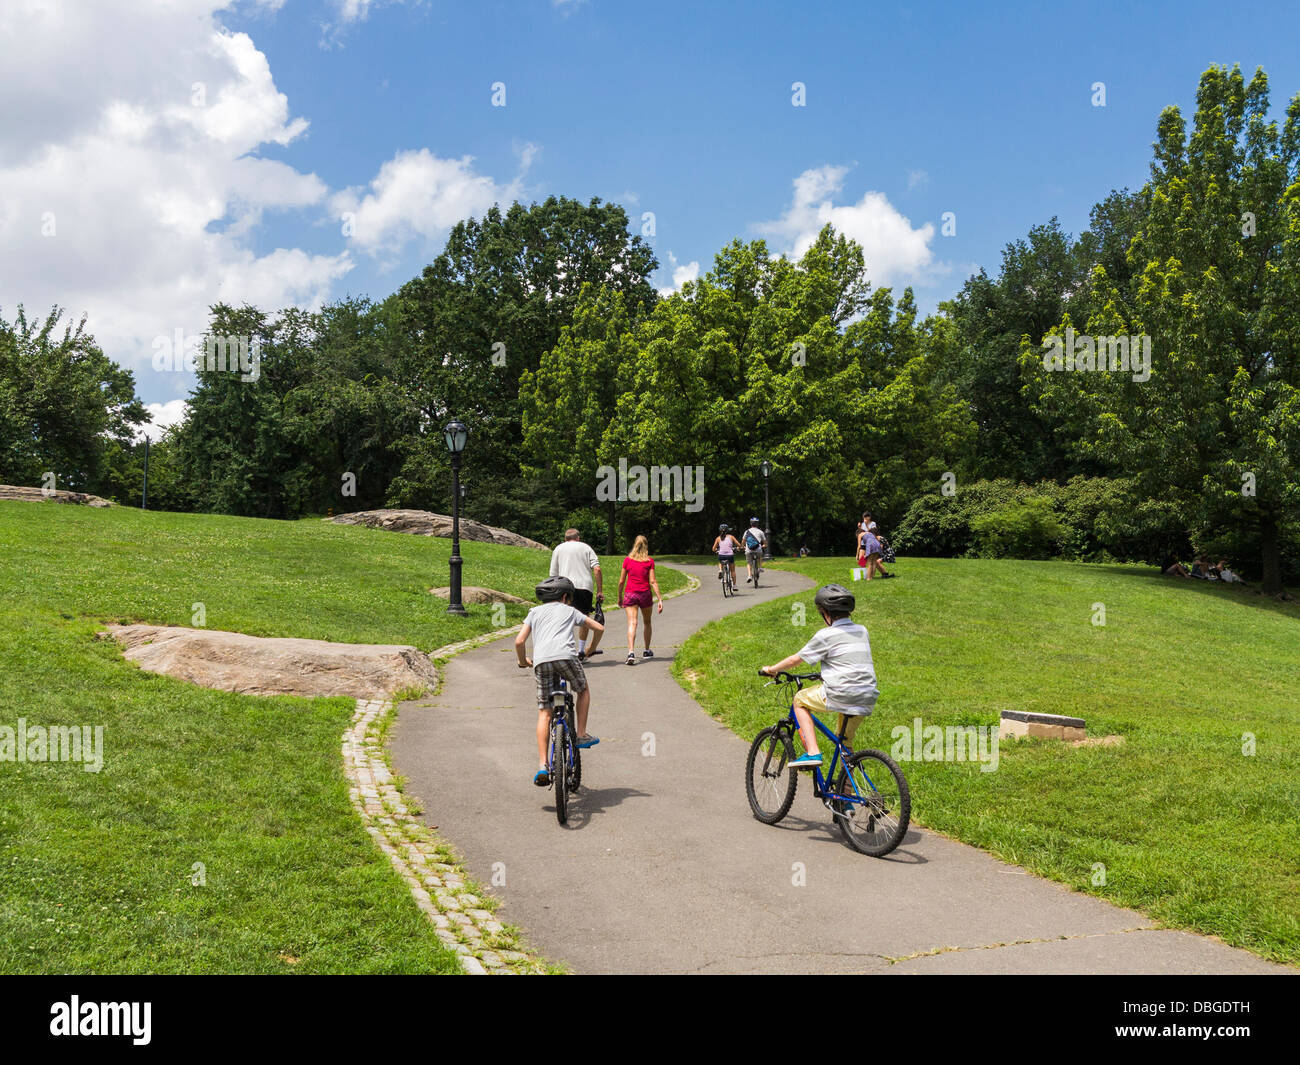 Children cycling in Central Park, NYC on a path in the summer Stock Photo